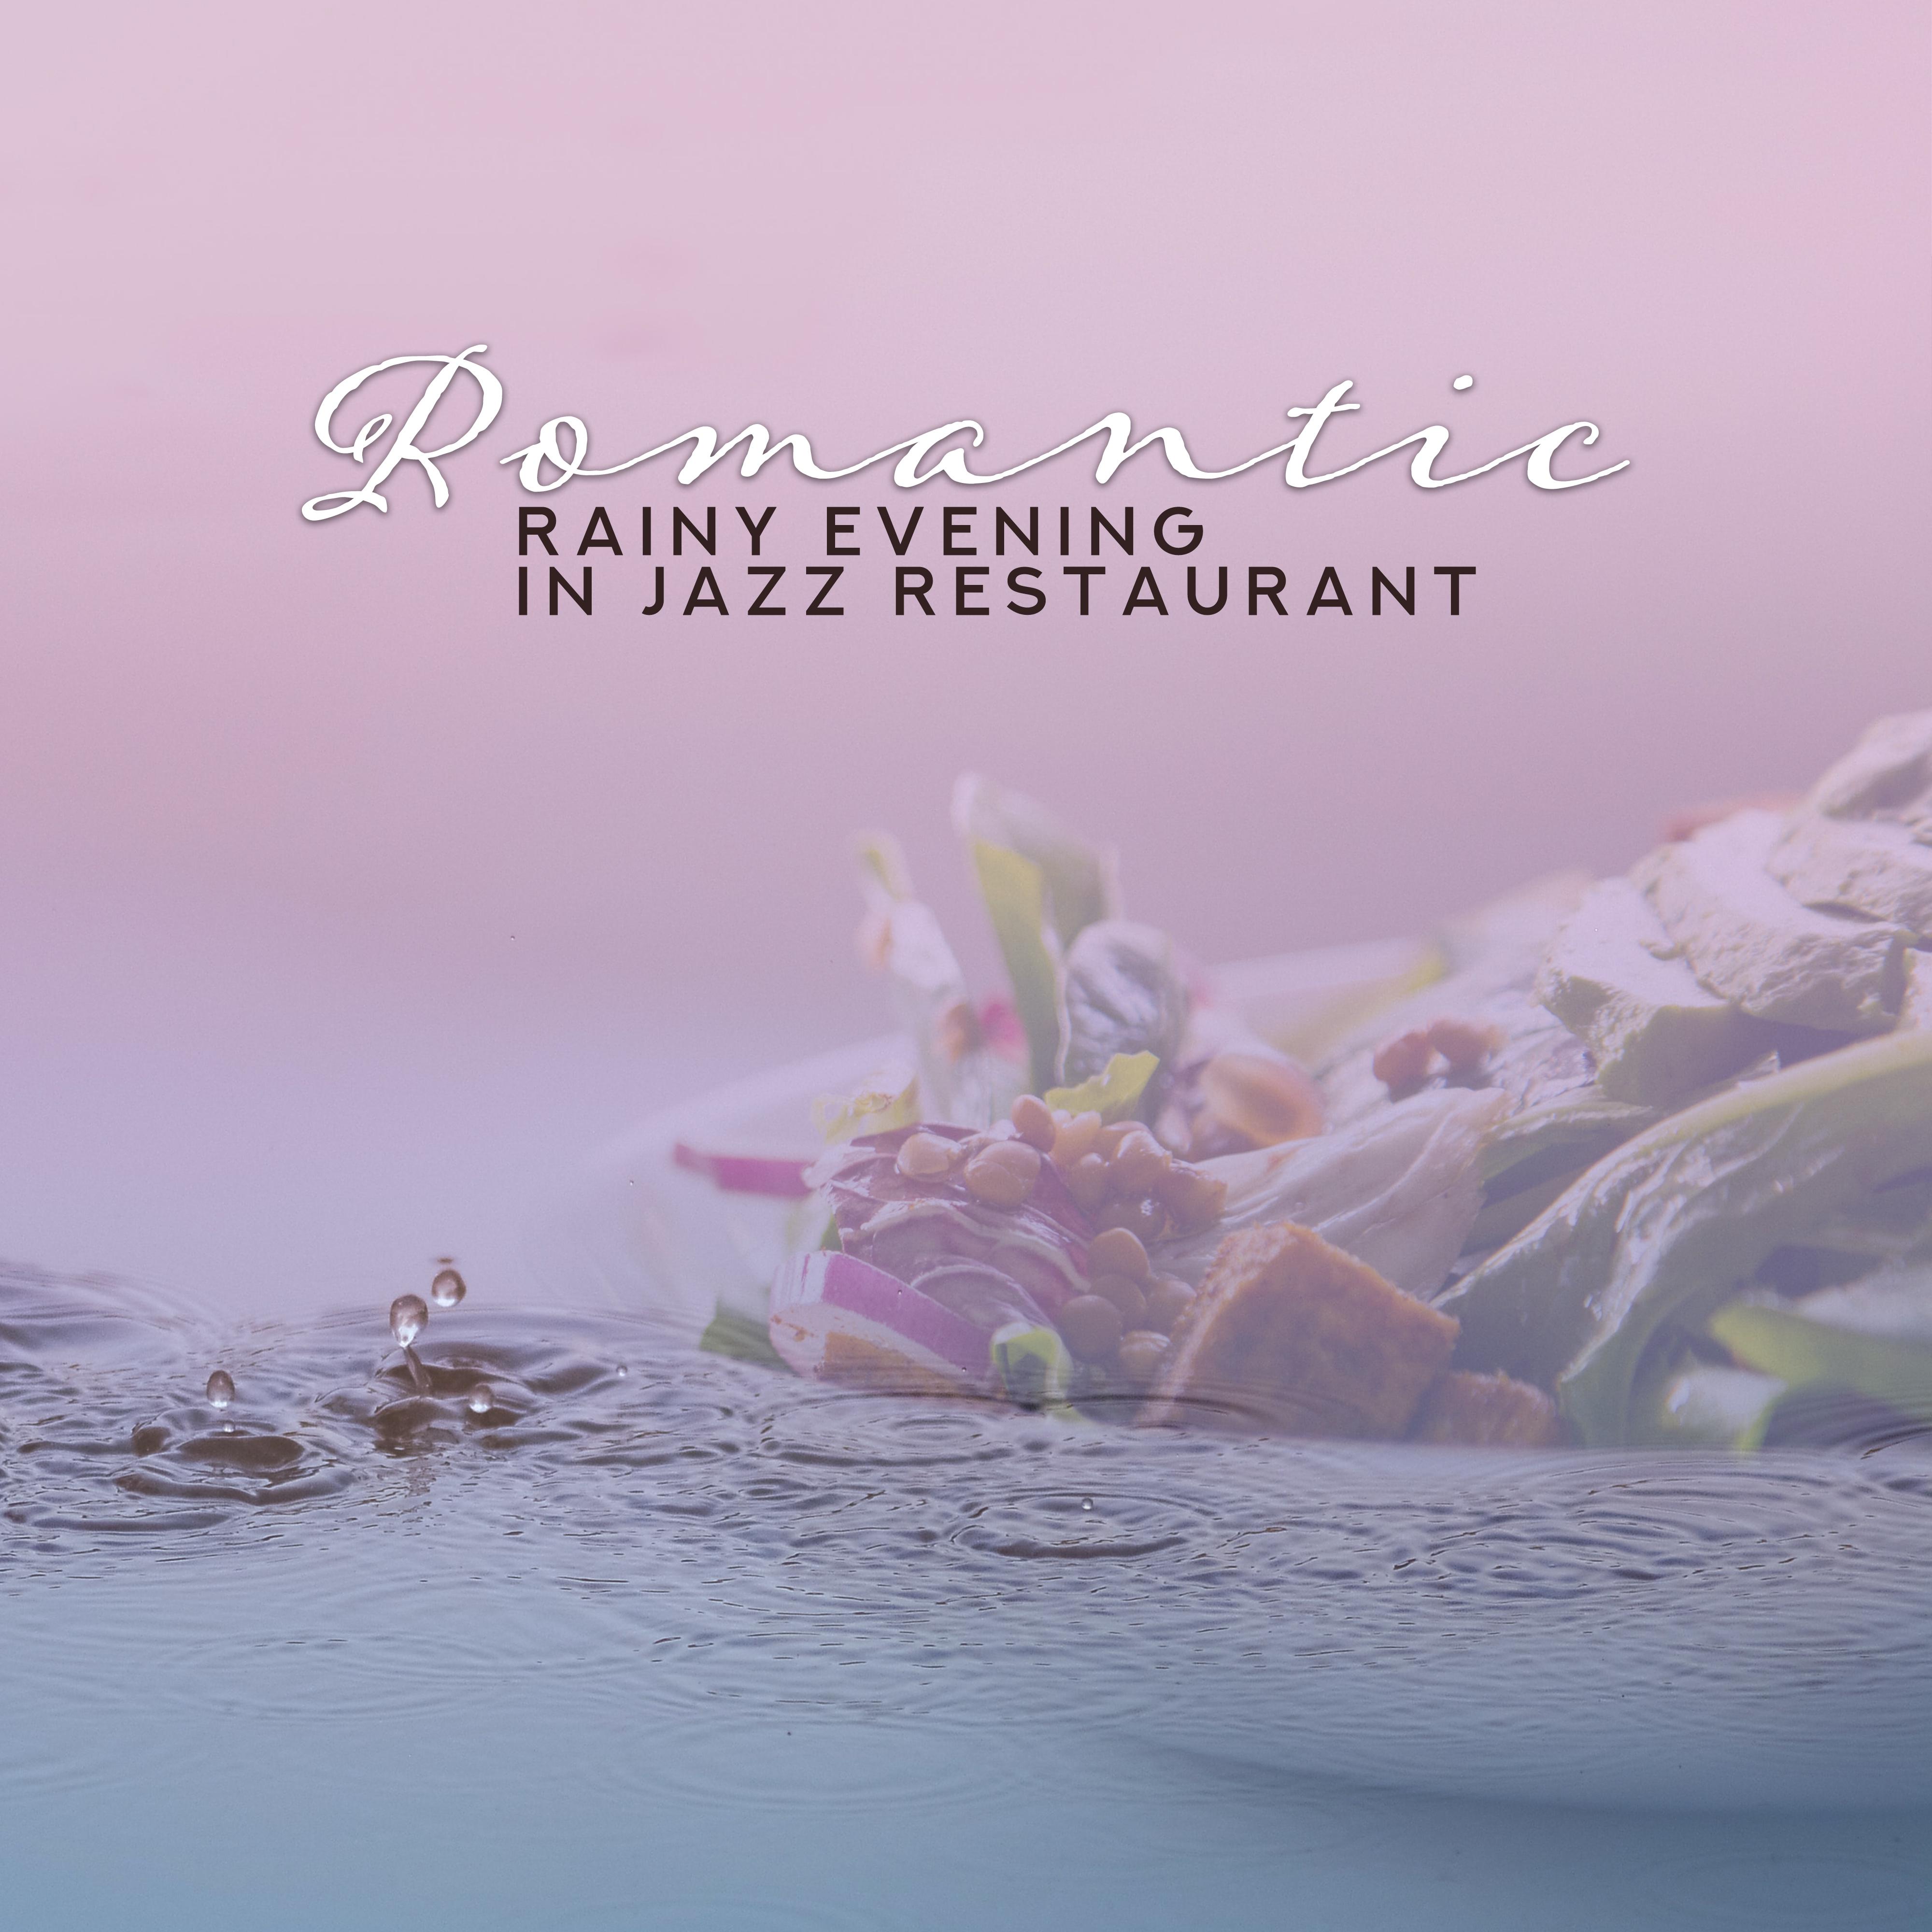 Romantic Rainy Evening in Jazz Restaurant: 2019 Smooth Jazz Selection for Couples in Love, Perfect Background for Anniversary Dinner with Wine Dinking, Intimate Moments at Home Full of Passion & Desire